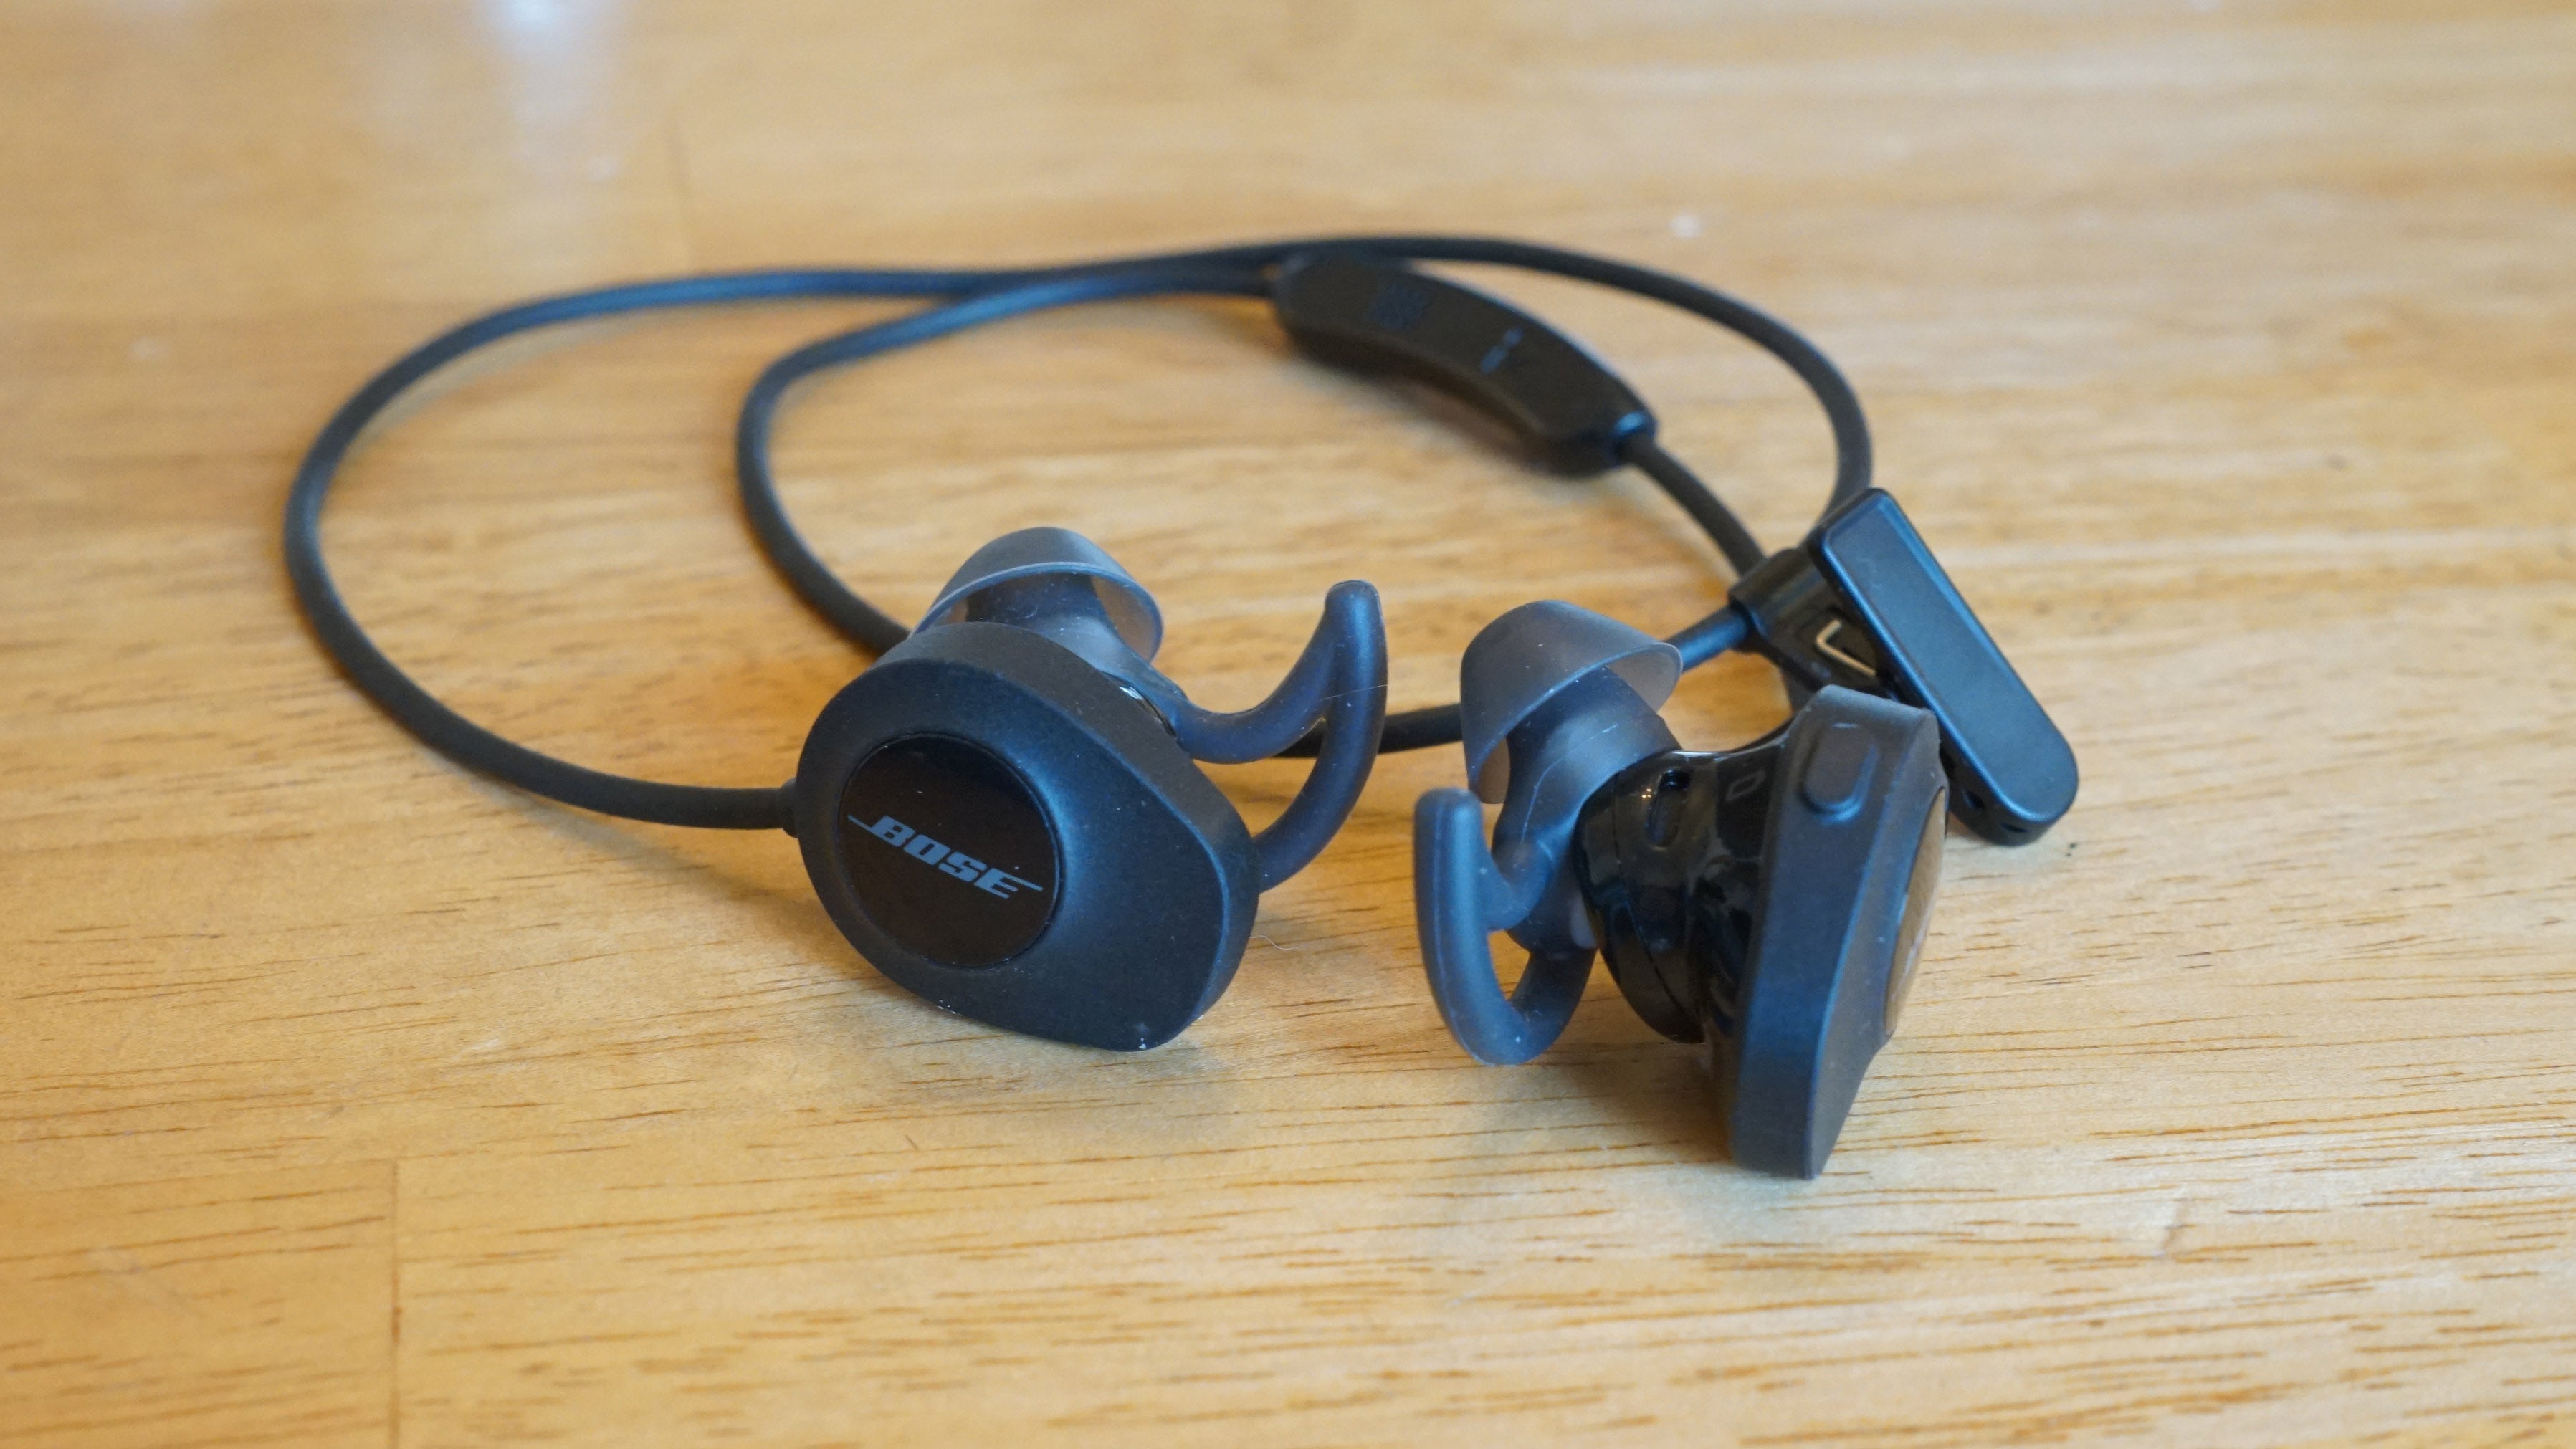 Bose SoundSport wireless headphones review: mostly great for - Velo